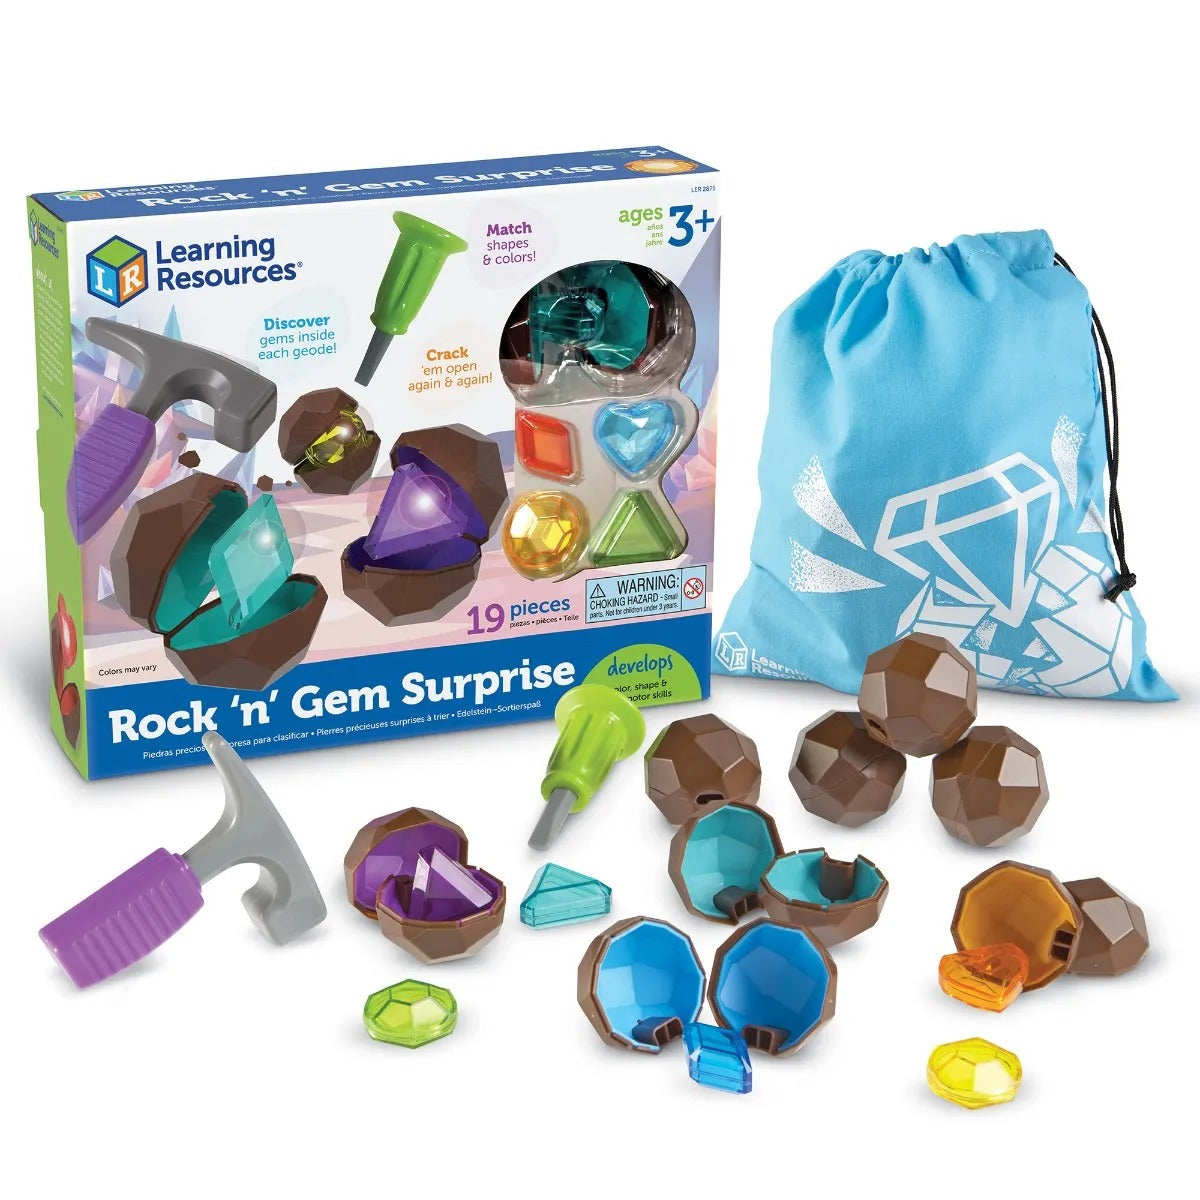 Learning Resources Rock 'n Gem Surprise, Crack open the rocks to reveal the treasure in Rock ‘N’ Gem Surprise! Children can discover colourful gems in different shapes and sizes, helping to build and develop fine motor skills, colour and shape recognition and role-playing skills. CRACK open play rocks to reveal colourful surprise gems again and again! Crack open a colourful gem in this kids surprise toy! Little ones get a no-mess introduction to sorting, matching, and counting with the play rocks (geodes) a